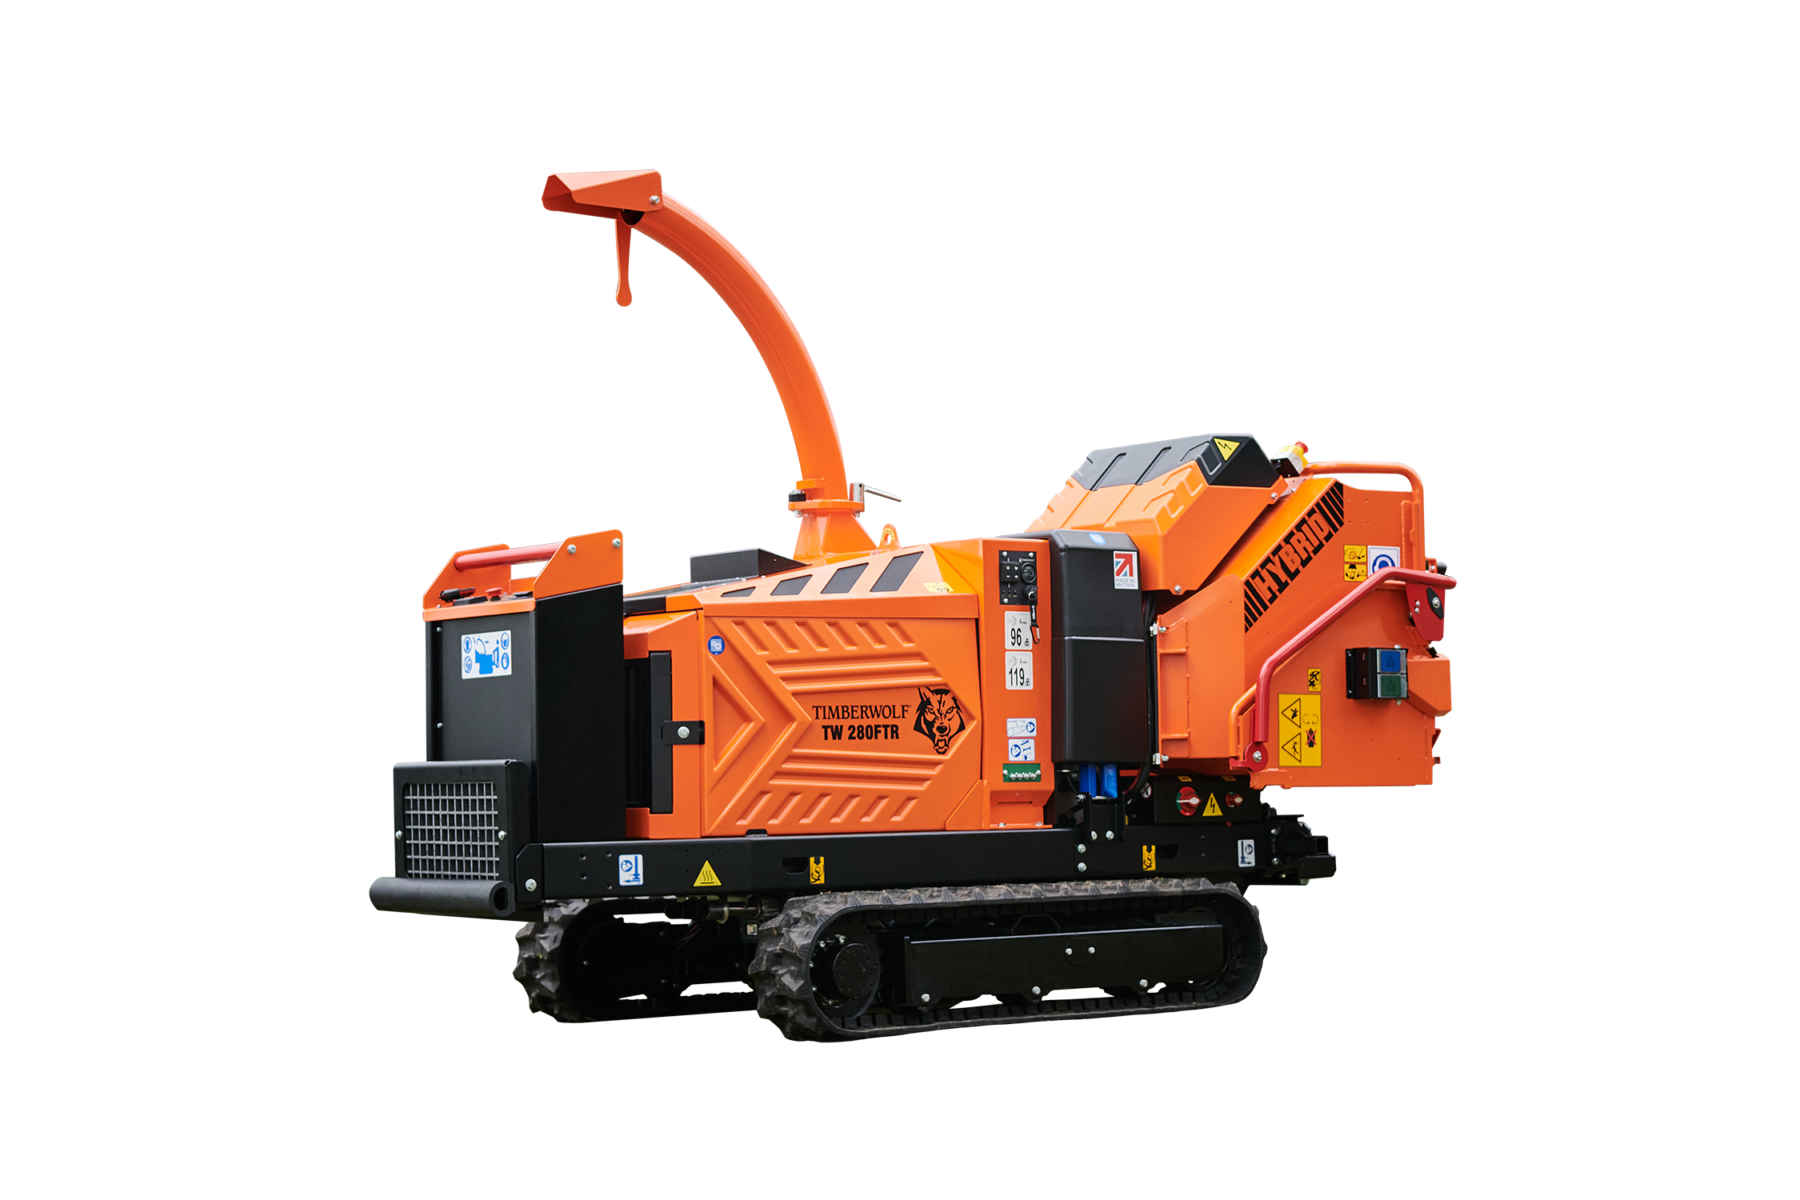 Timberwolf TW 280FTR Hybrid tracked wood chipper - sales hire parts service from Green Plant